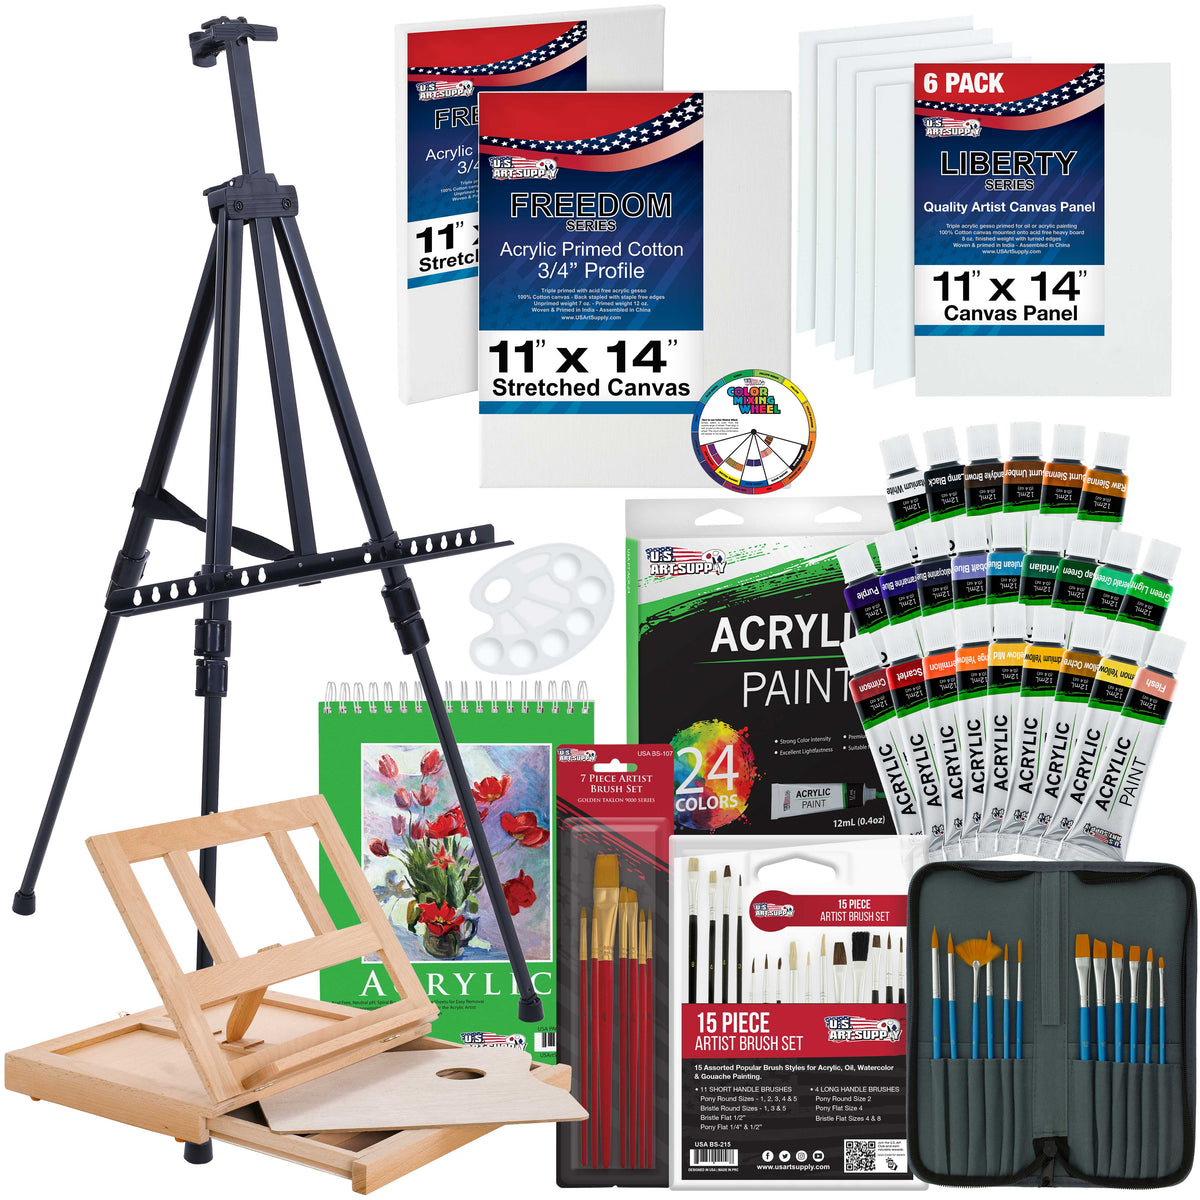 Easel Art Set, 40 Piece Painting Supplies with 1 Art Easel, 24 Acrylic Paint Set, 4 Painting Canvas, 12 Paint Brushes & Necessary Paint Set Tools, Art